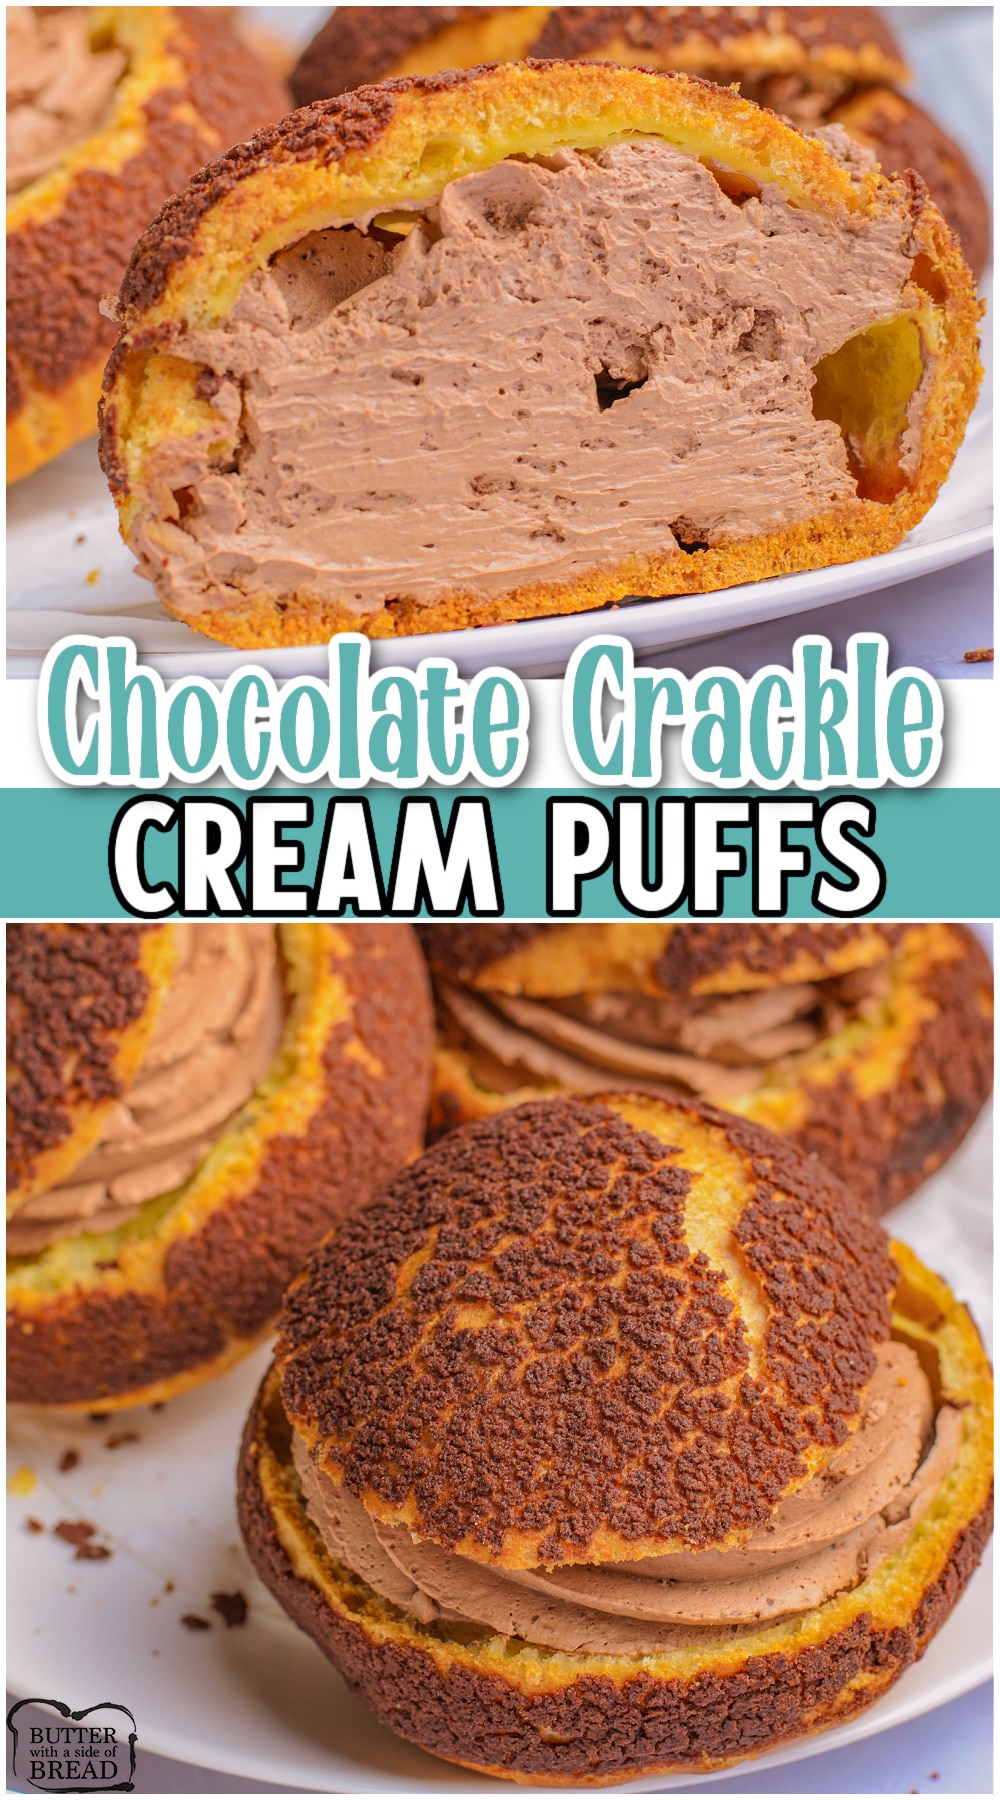 Chocolate Choux au Craquelin is a perfect dessert to serve up when you’re feeling fancy! A chocolate filled cream puff topped with crunchy chocolate cookies is a perfect treat for any chocolate lover!